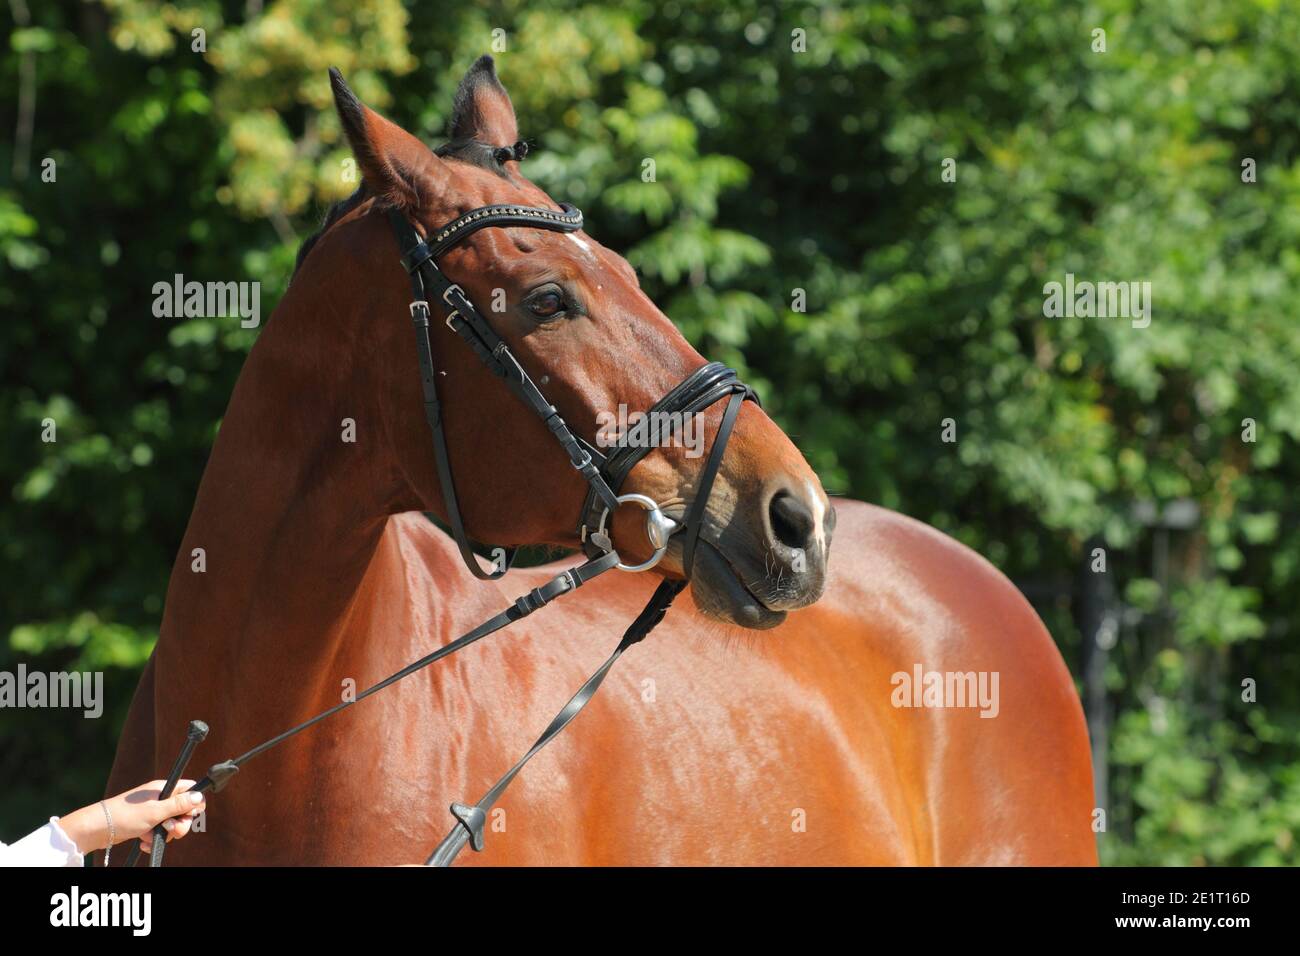 Thoroughbrd horse in summer ranch background Stock Photo